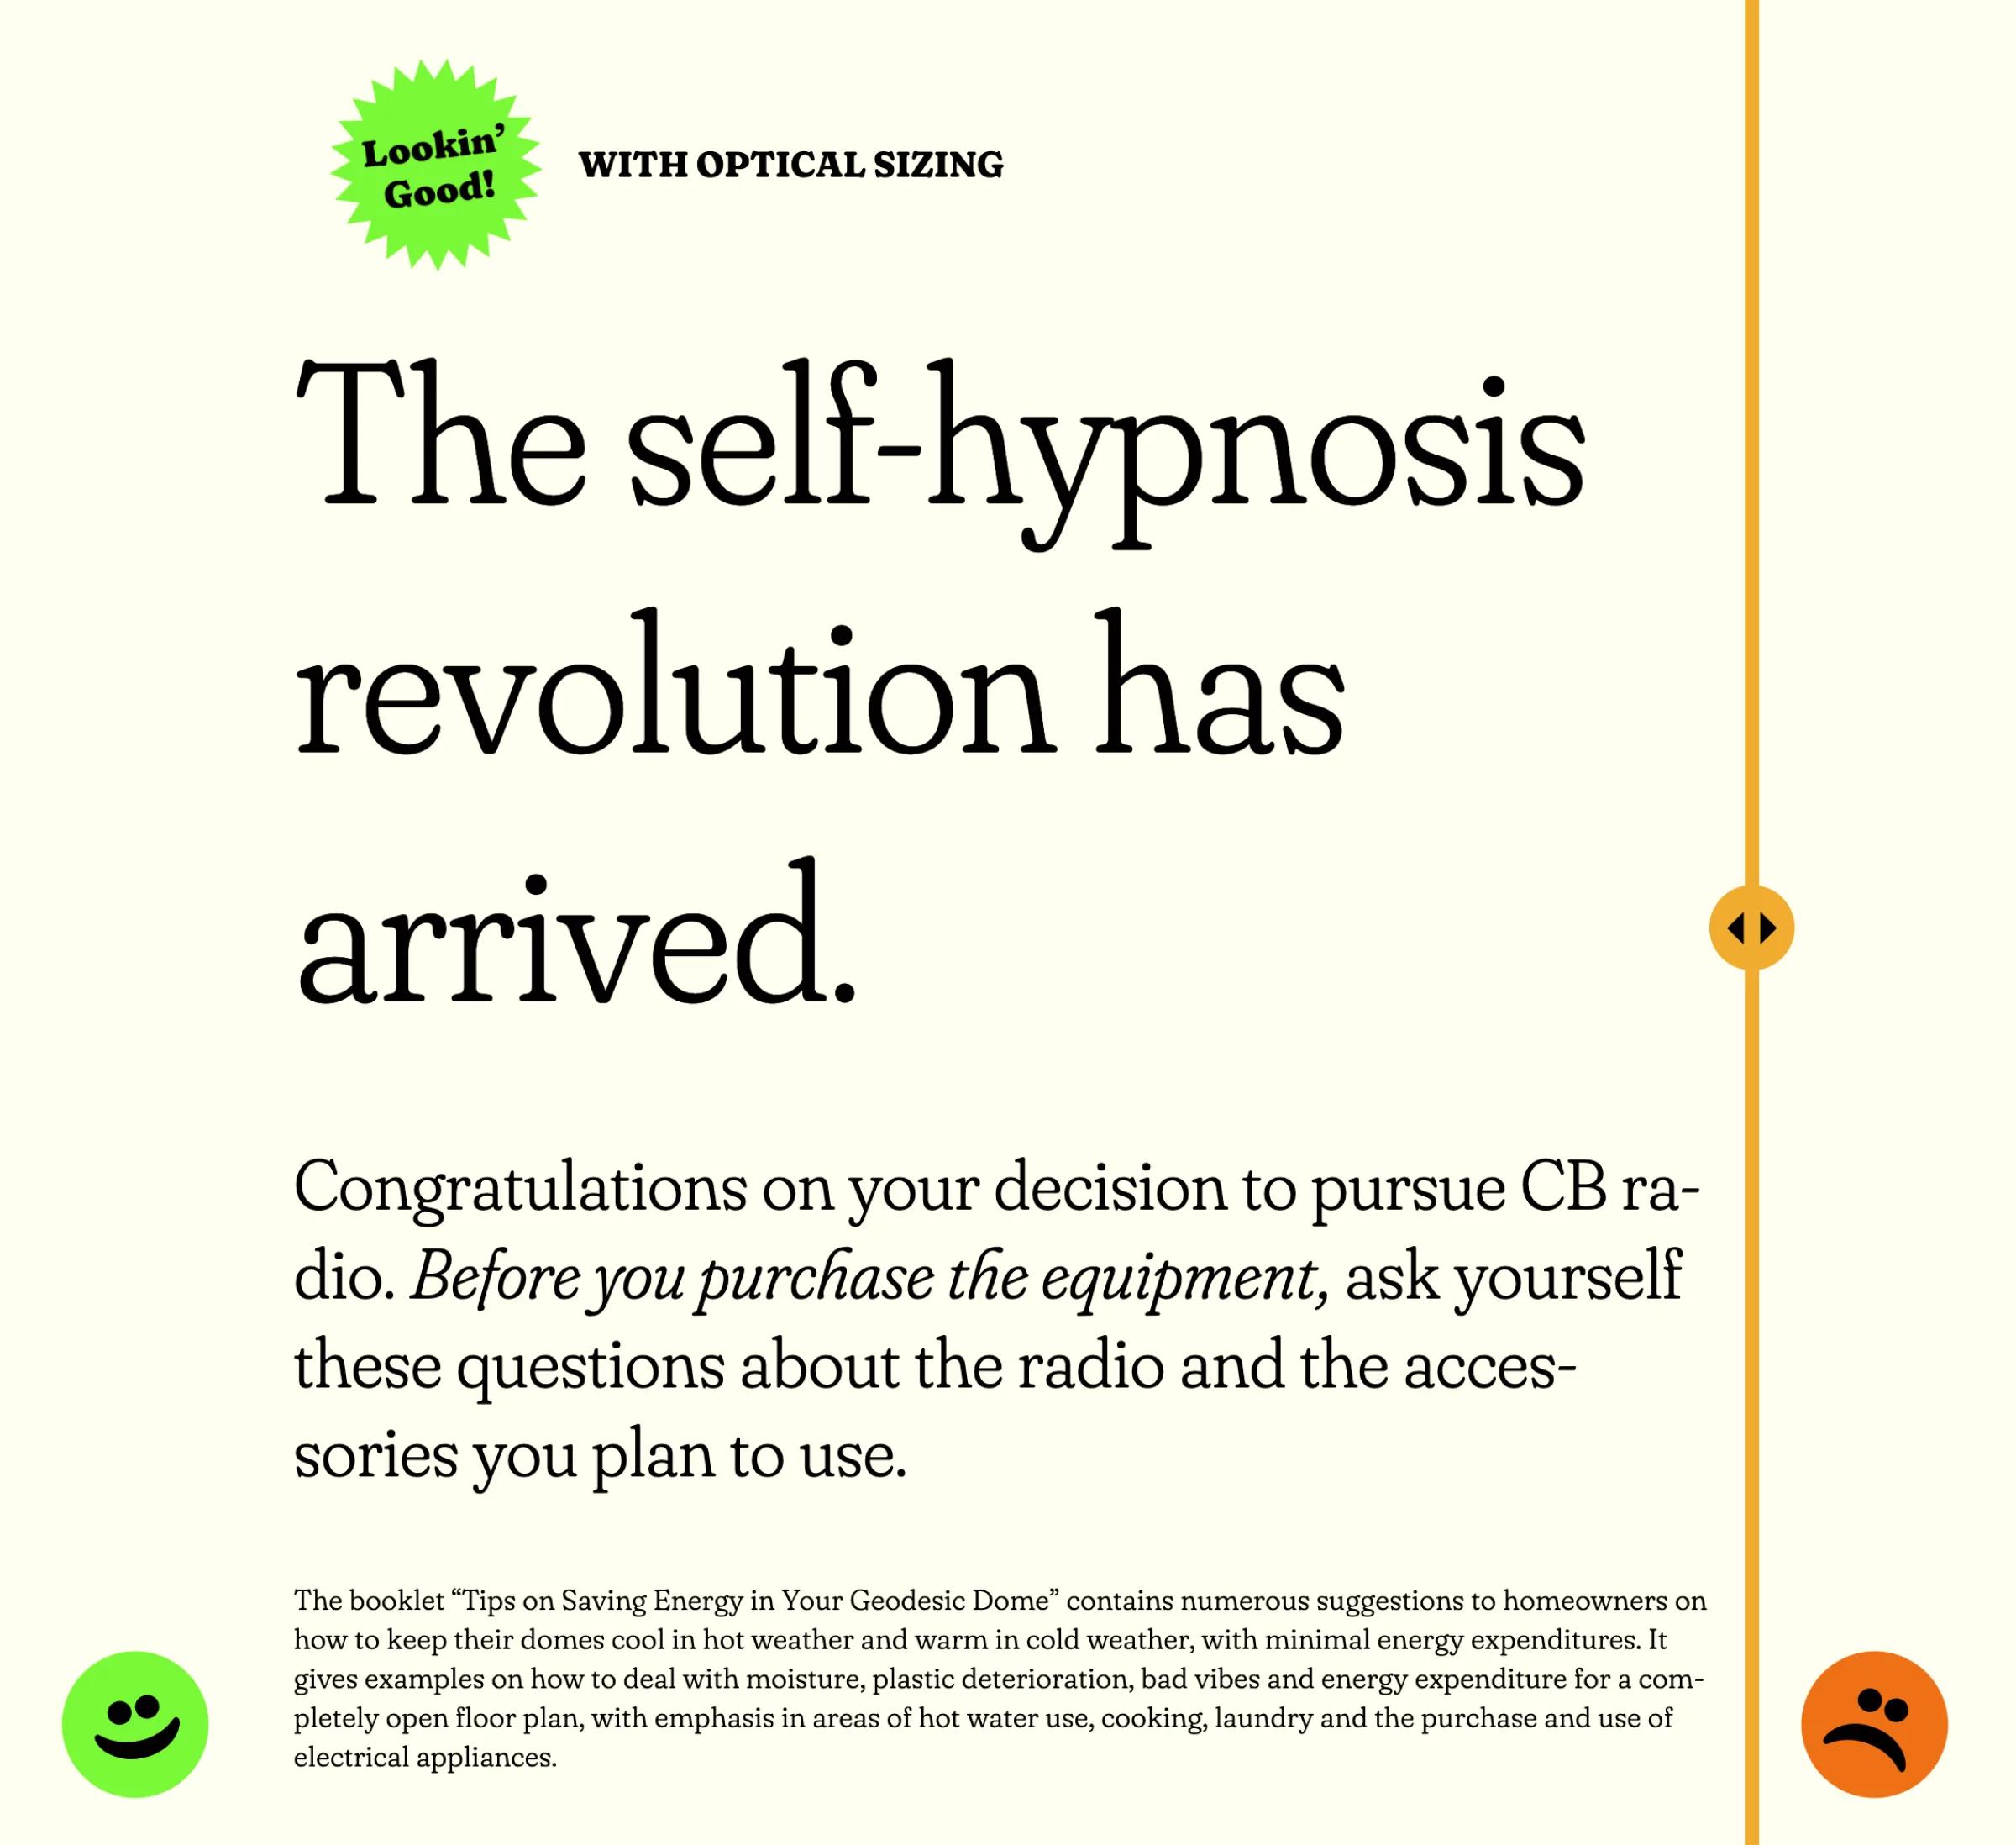 Text about self-hypnosis and radio purchase in 3 text sizes